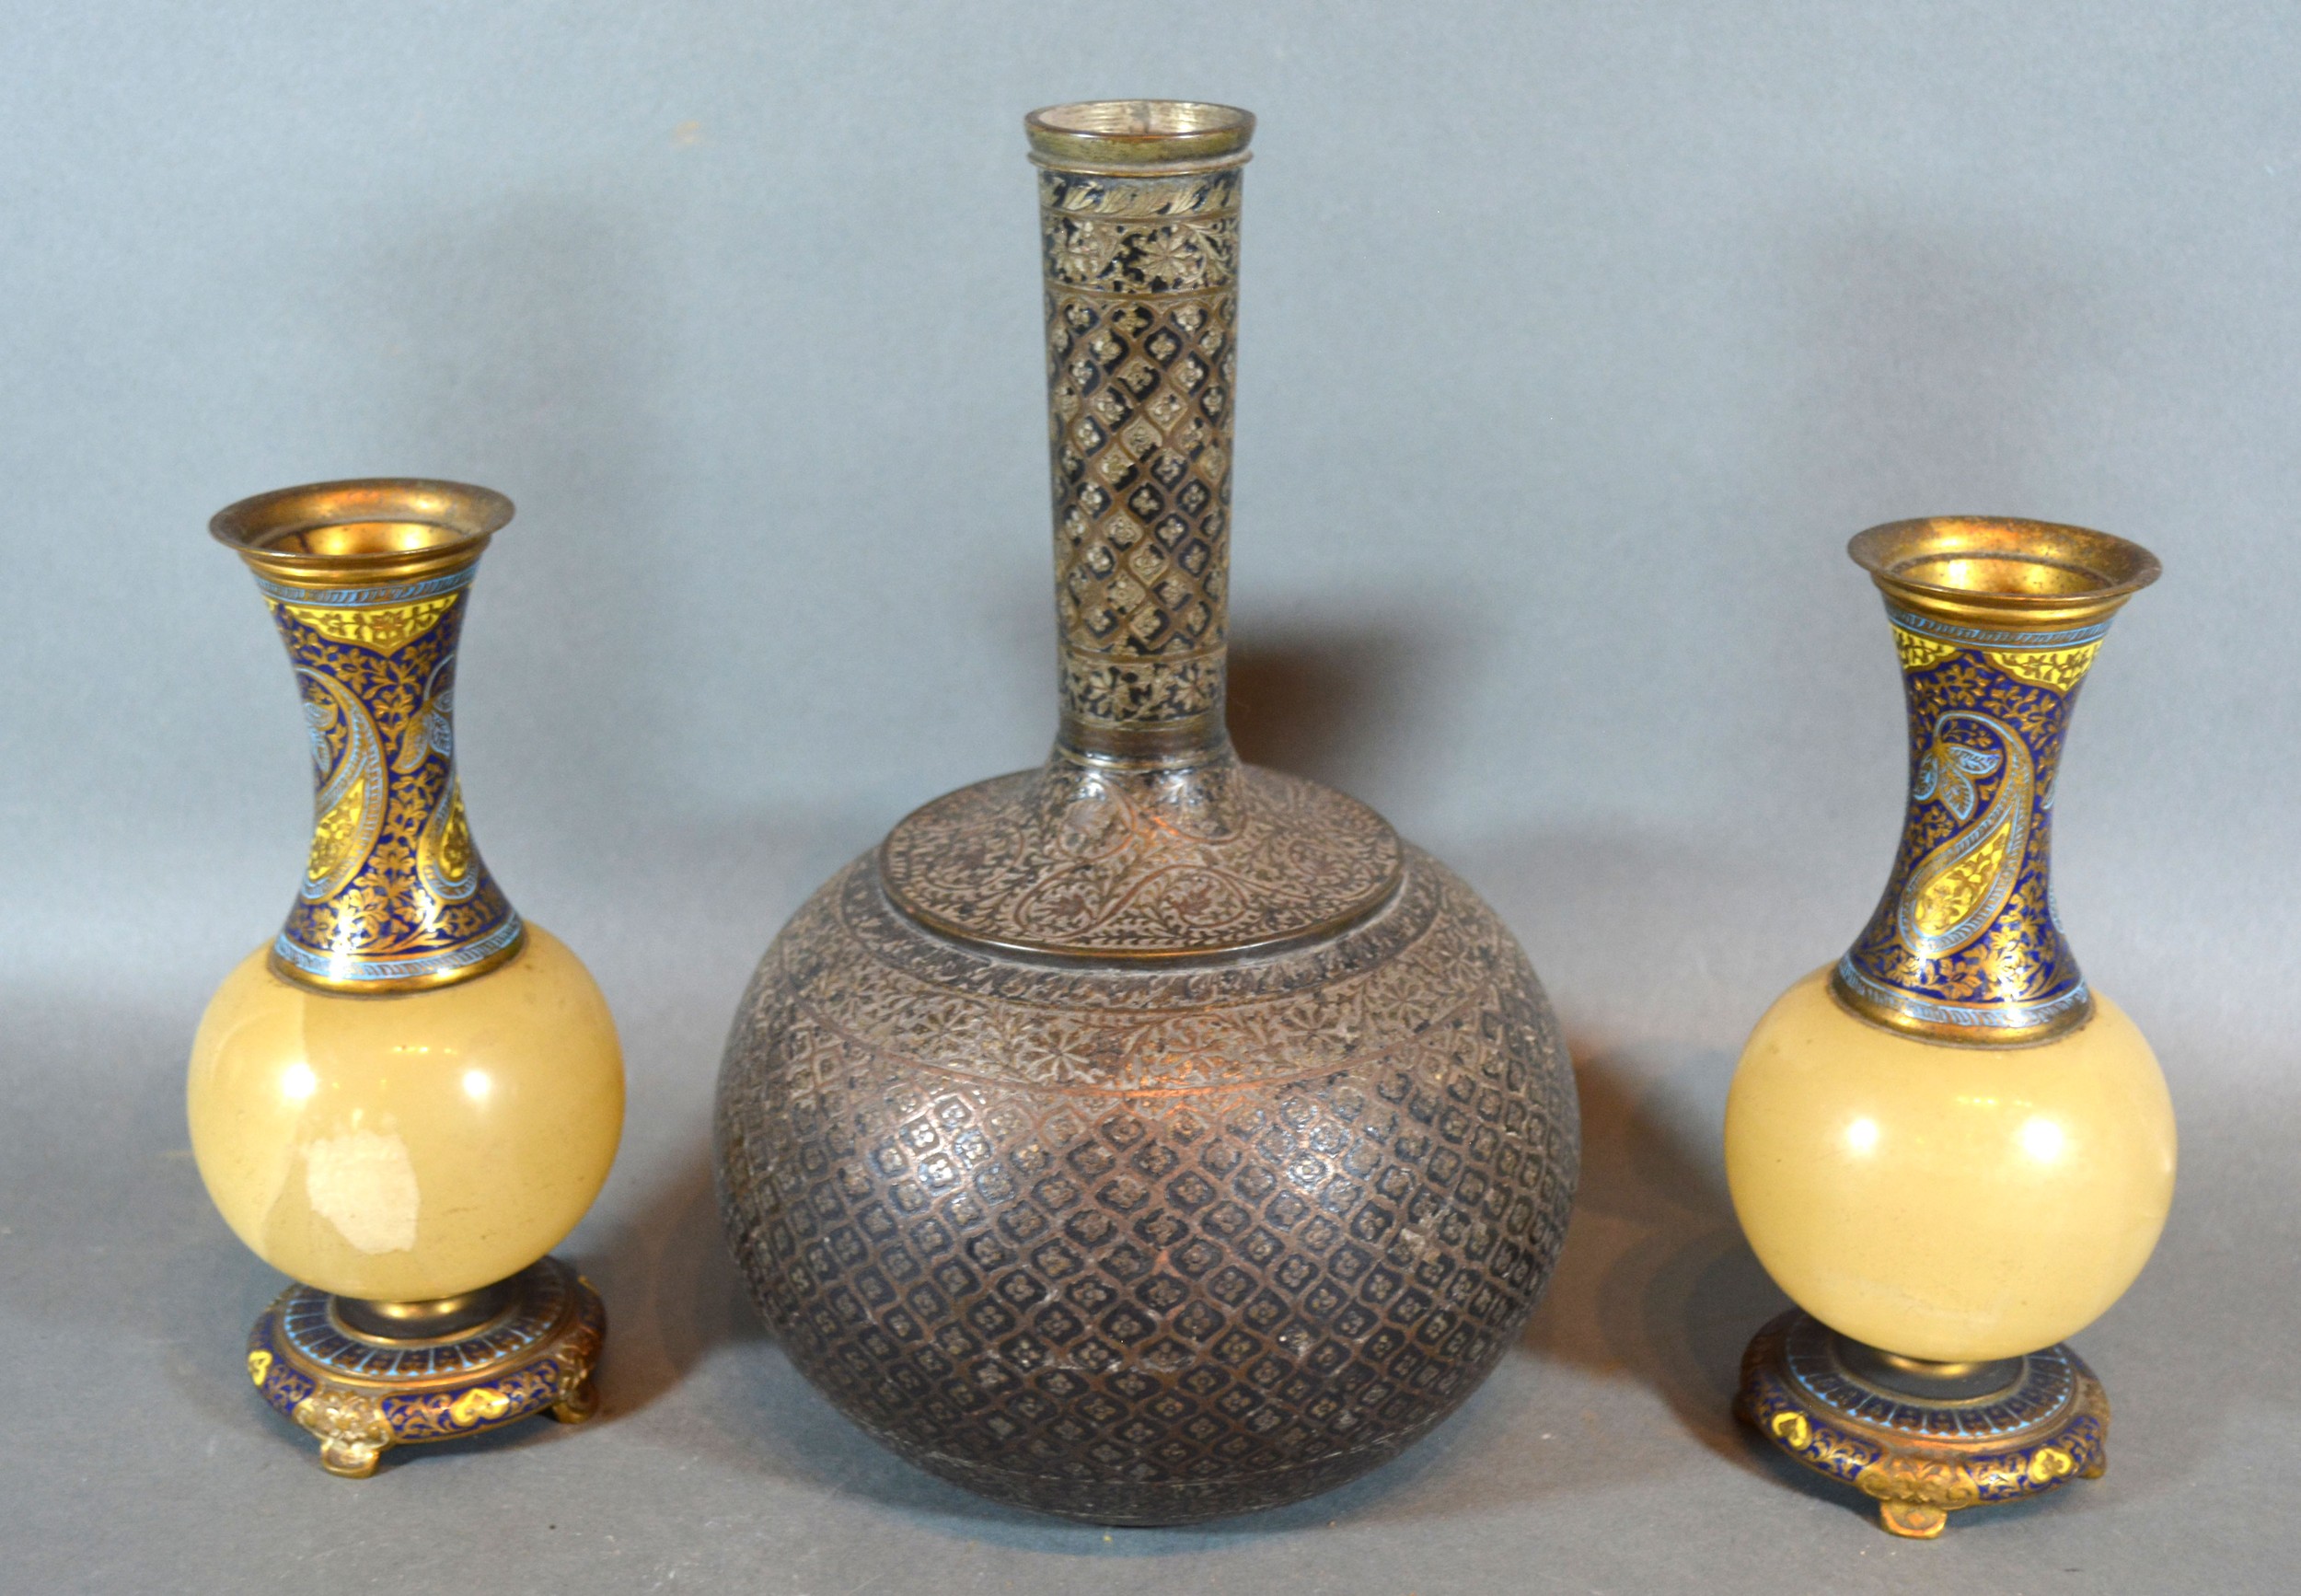 A Pair of Champleve and Onyx Vases 16 cms tall together with an Eastern bottleneck vase 23 cms tall